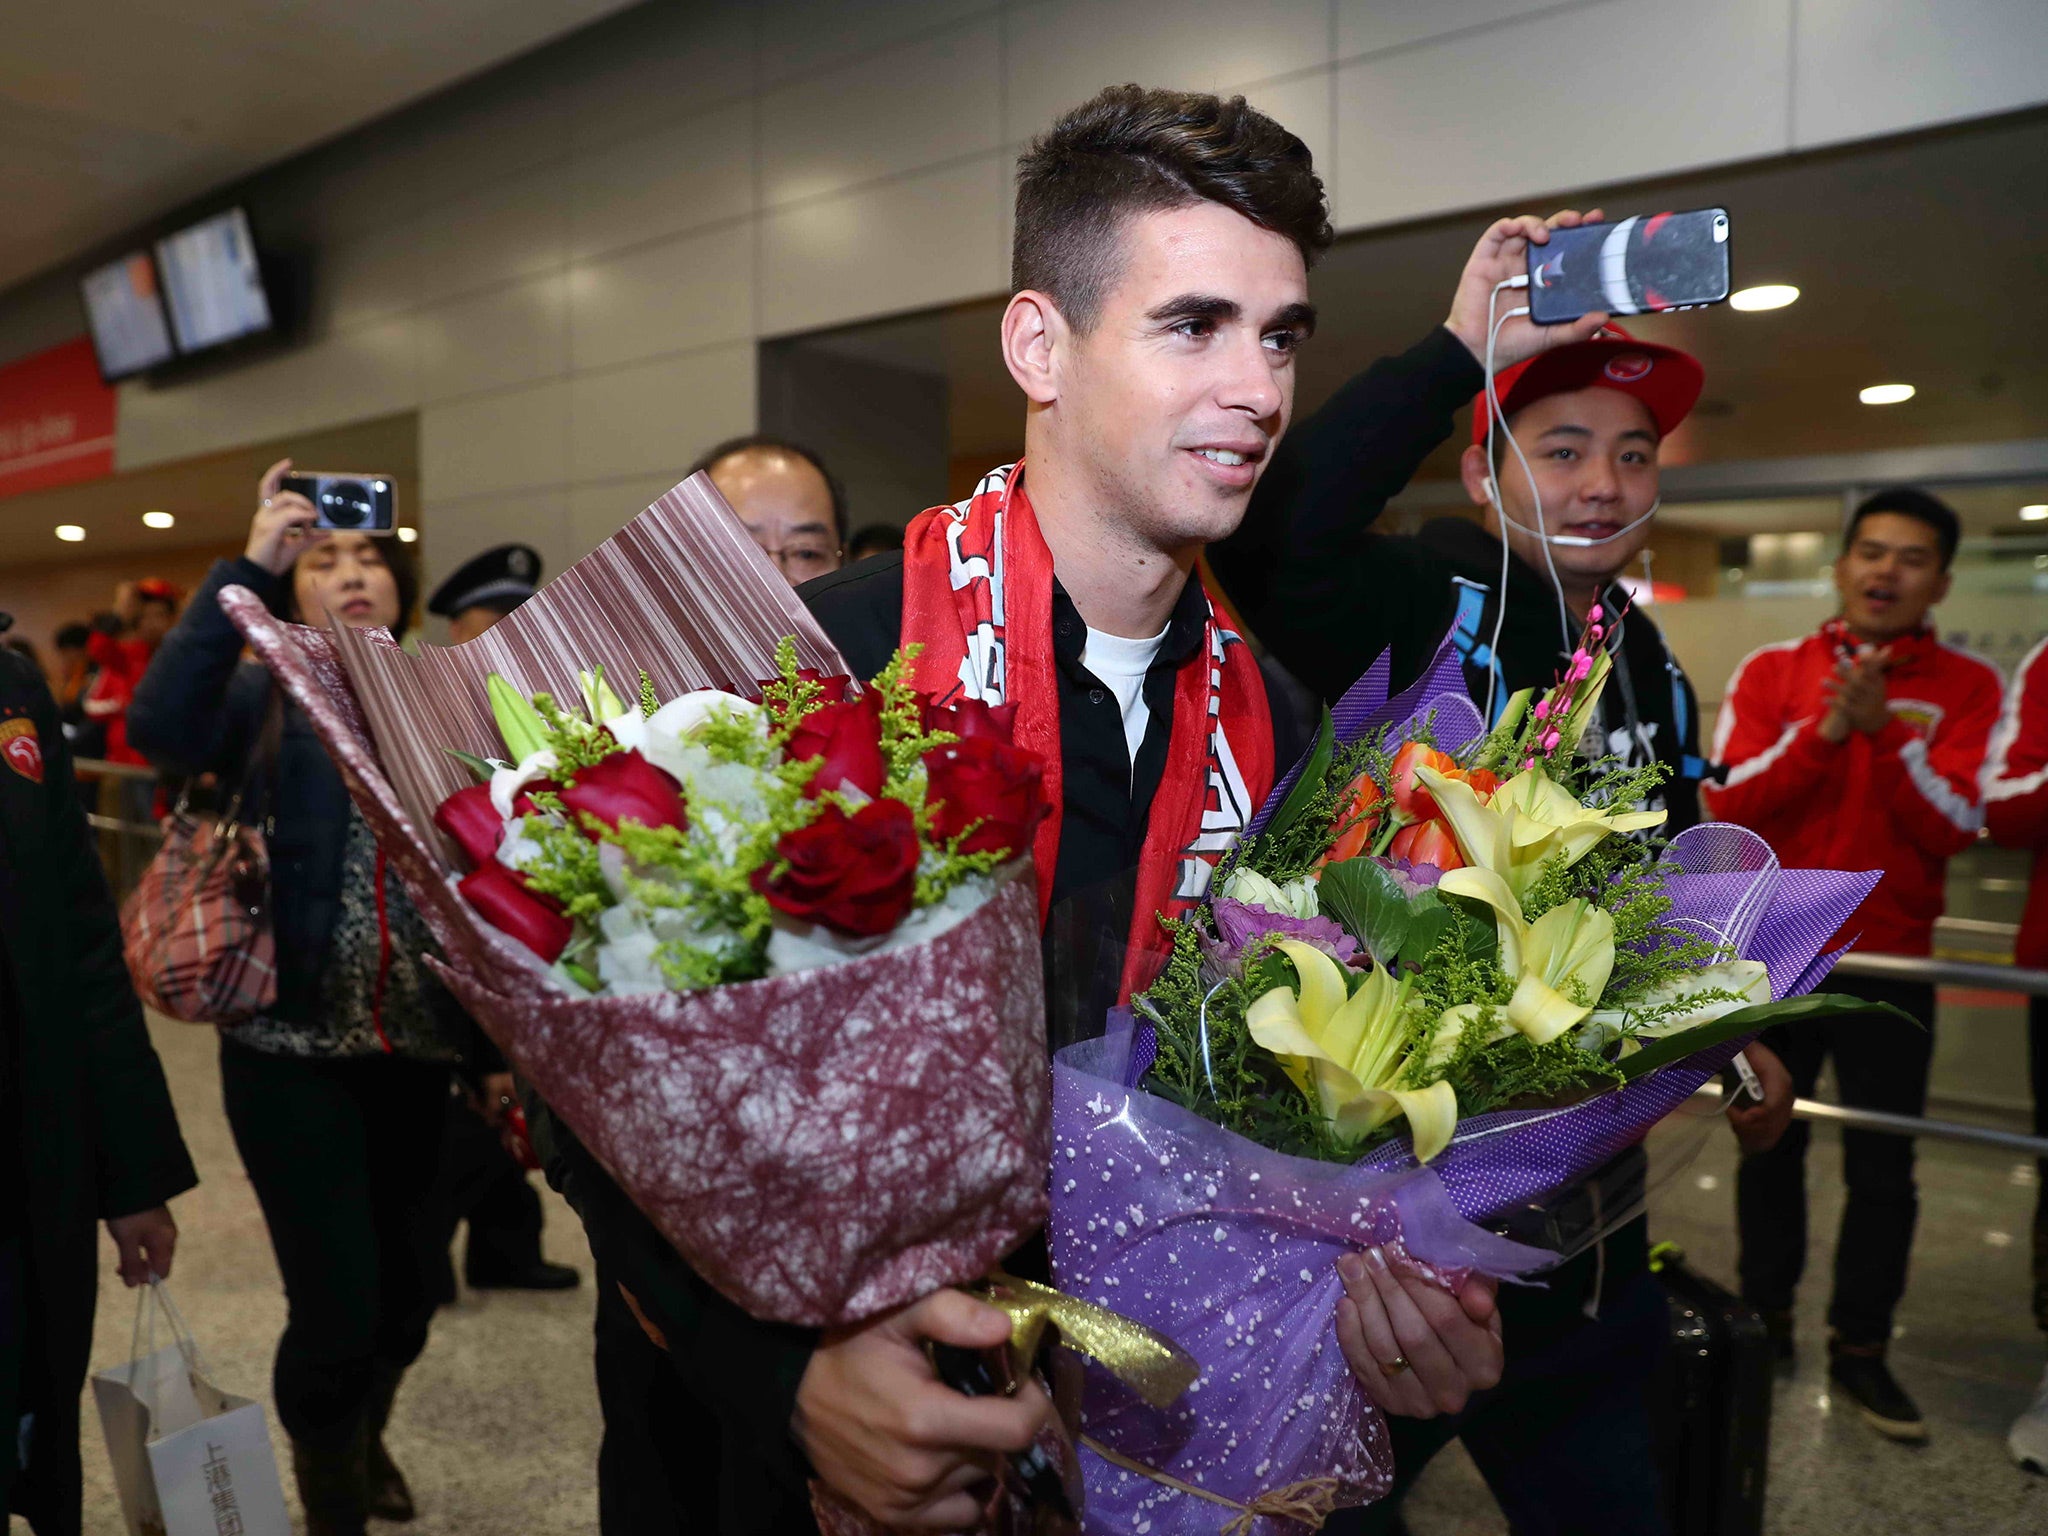 Oscar became the latest footballer to move to China while in his prime earlier this month